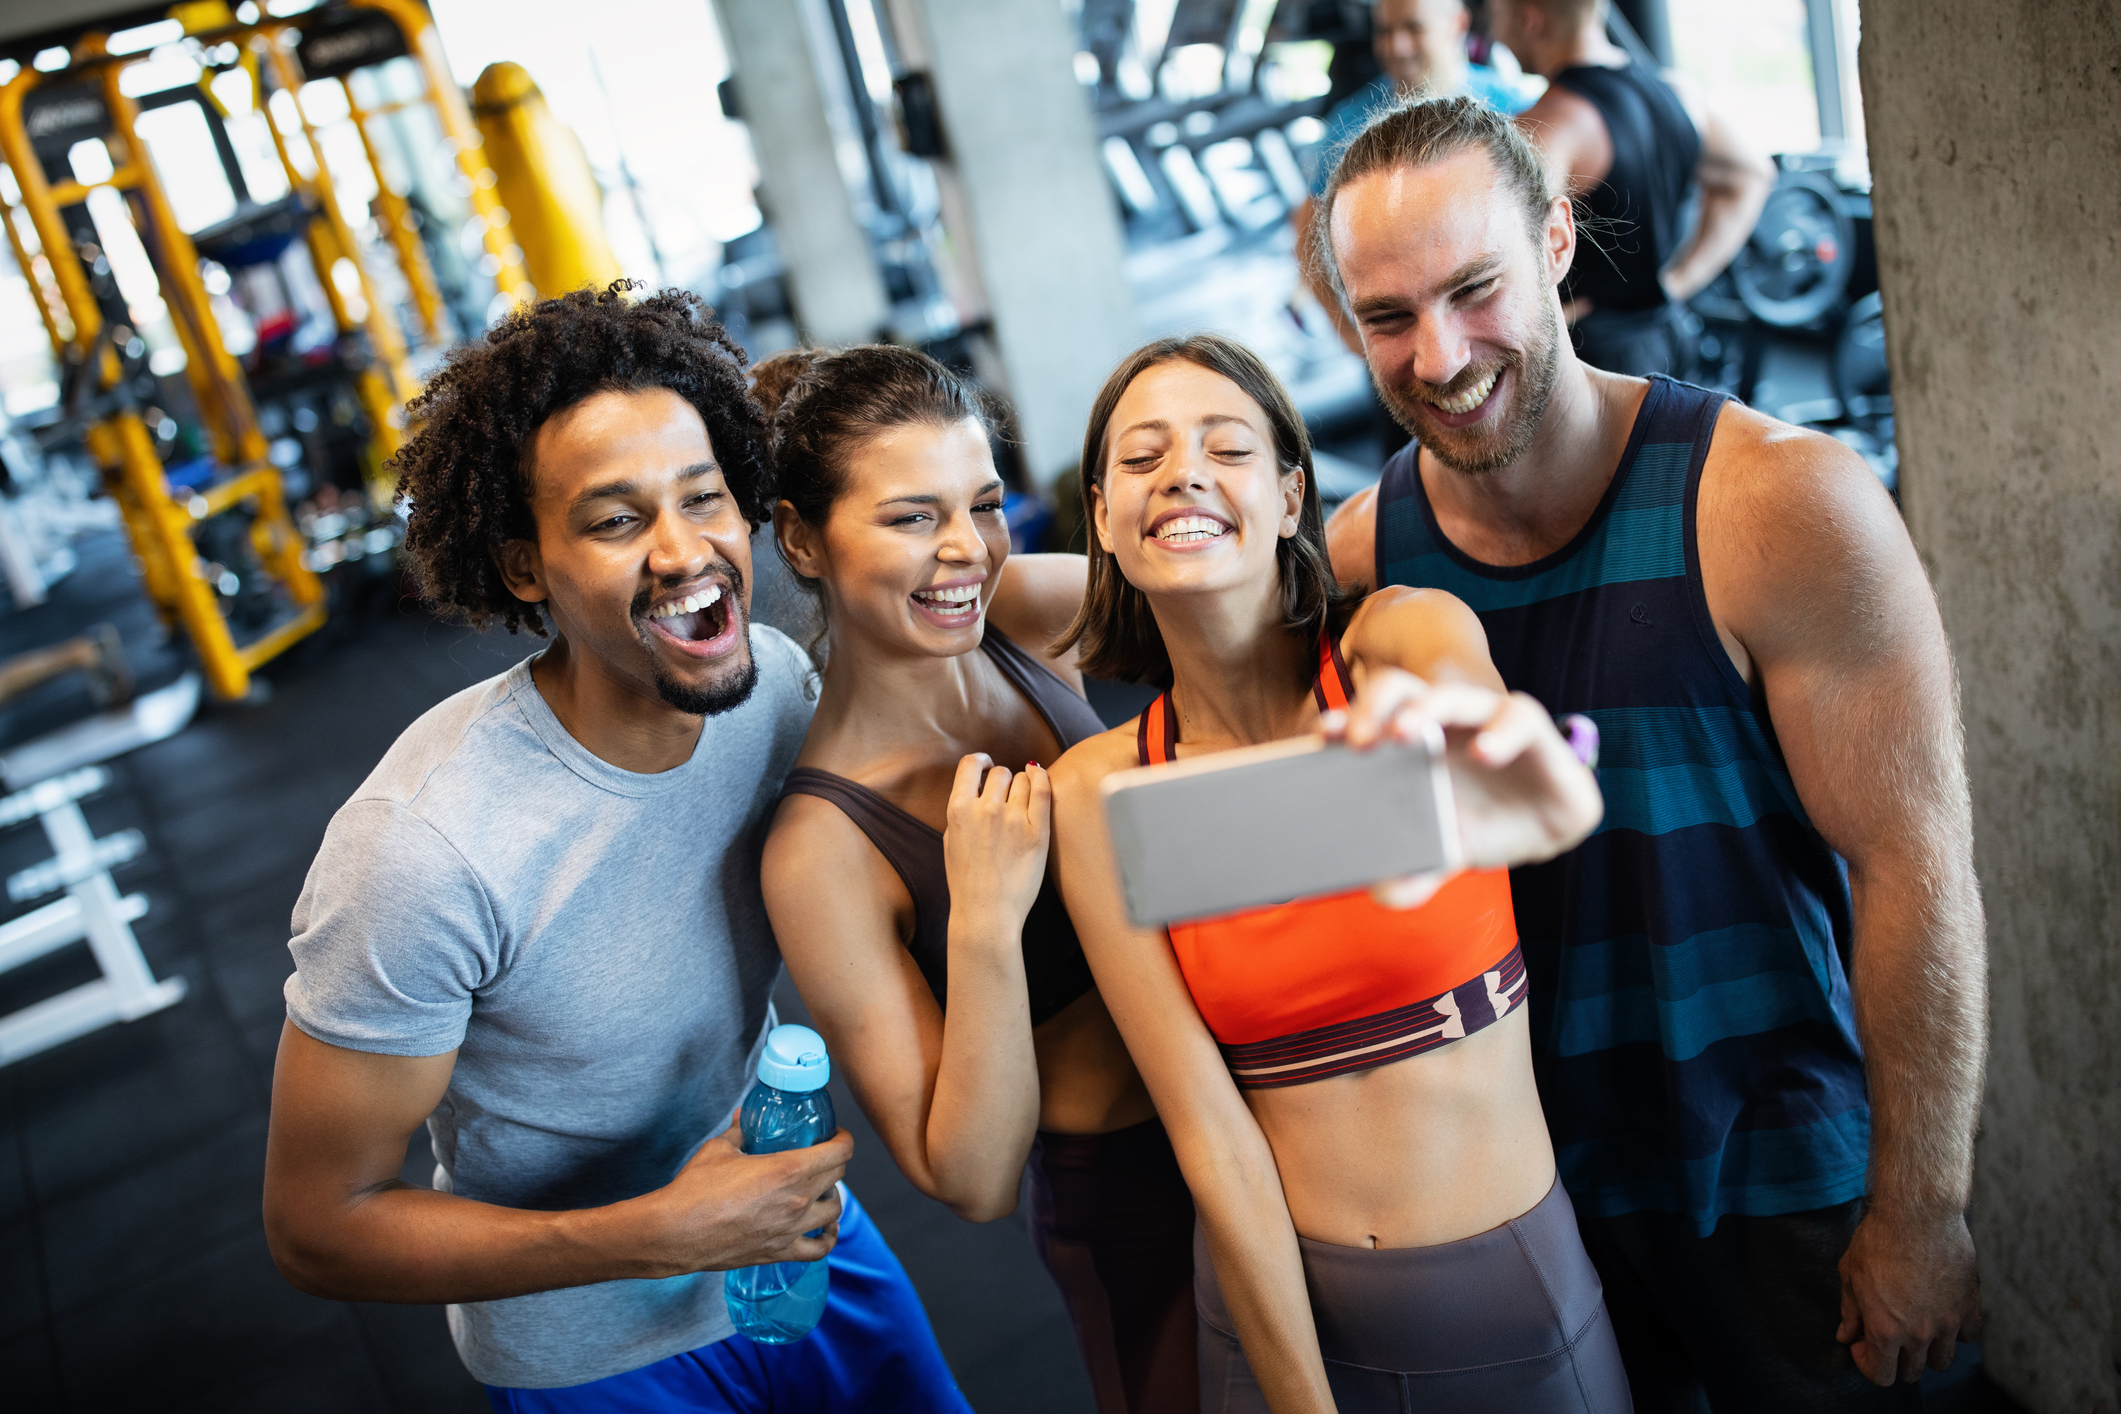 Friends having fun at the gym, making a selfie